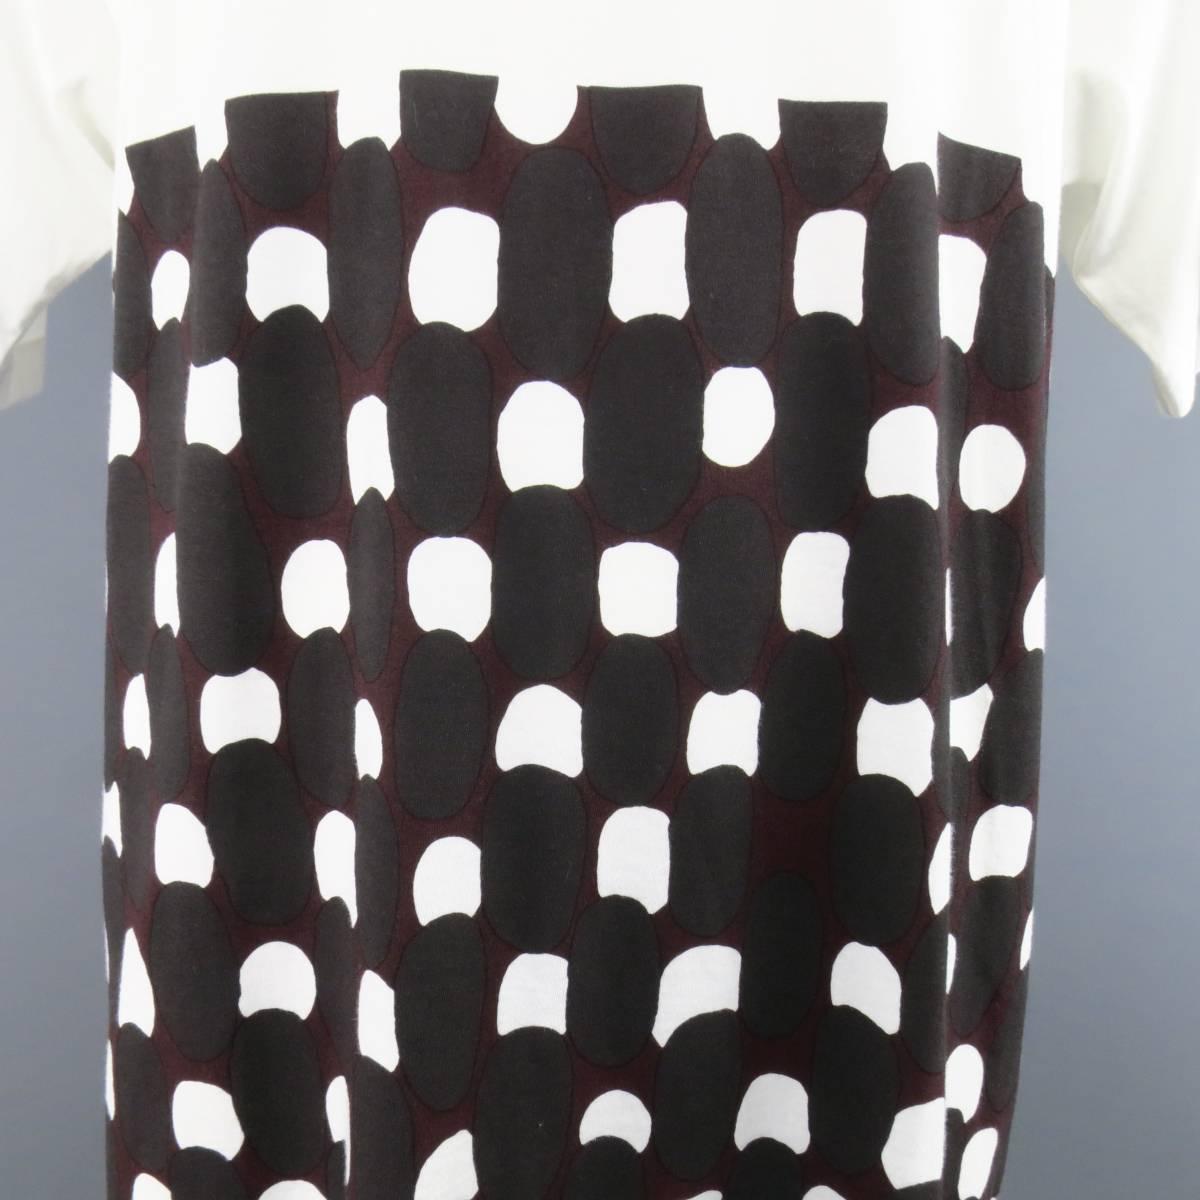 New MARNI short sleeve T-shirt in a white cotton featuring an extended hem and half color black with burgundy and charcoal abstract polka dot print. Made in Italy.
 
New with Tags.
Marked: IT 50
 
Measurements:
 
Shoulder: 20 in.
Chest: 48